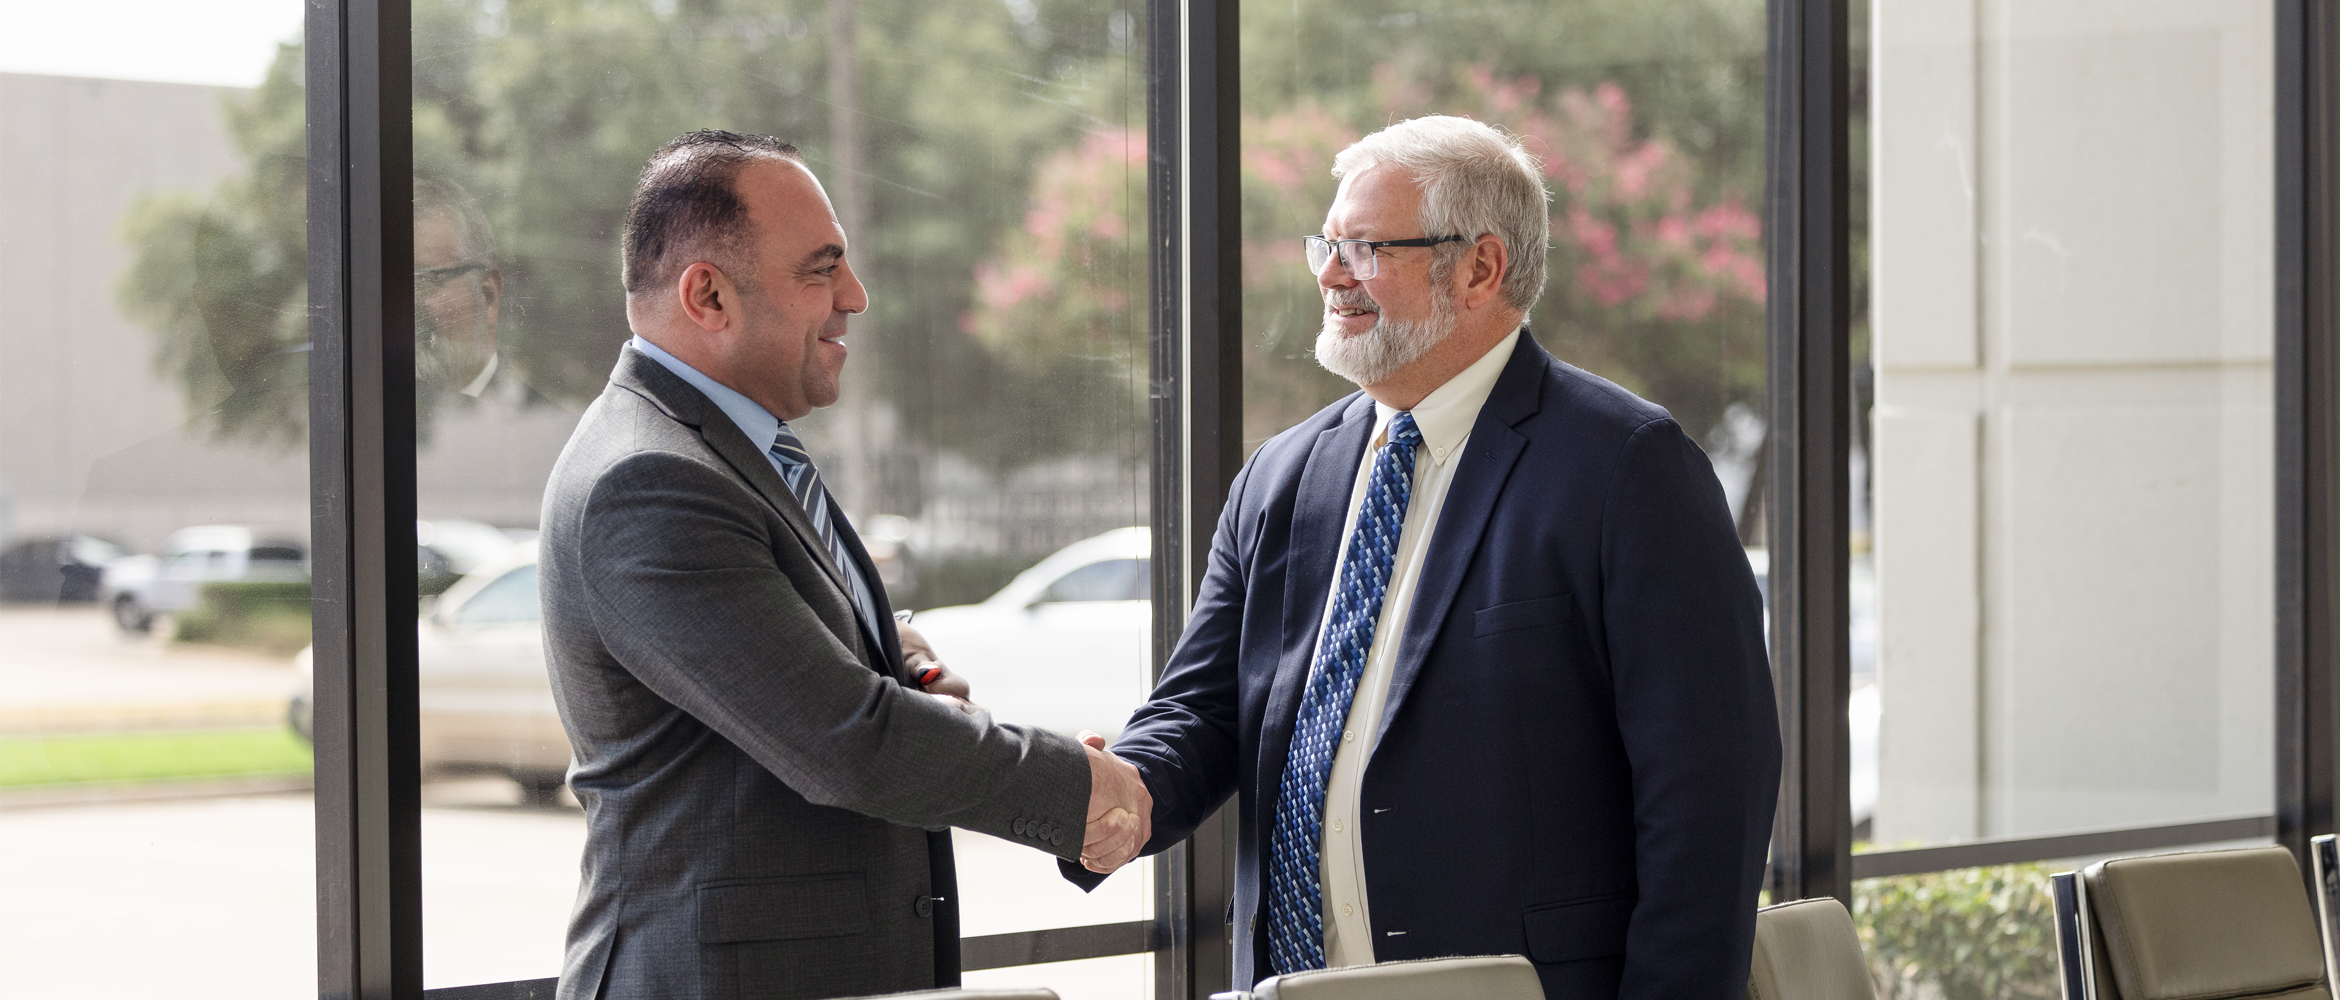 Two business professionals shaking hands at the start of their collaboration and partnership.